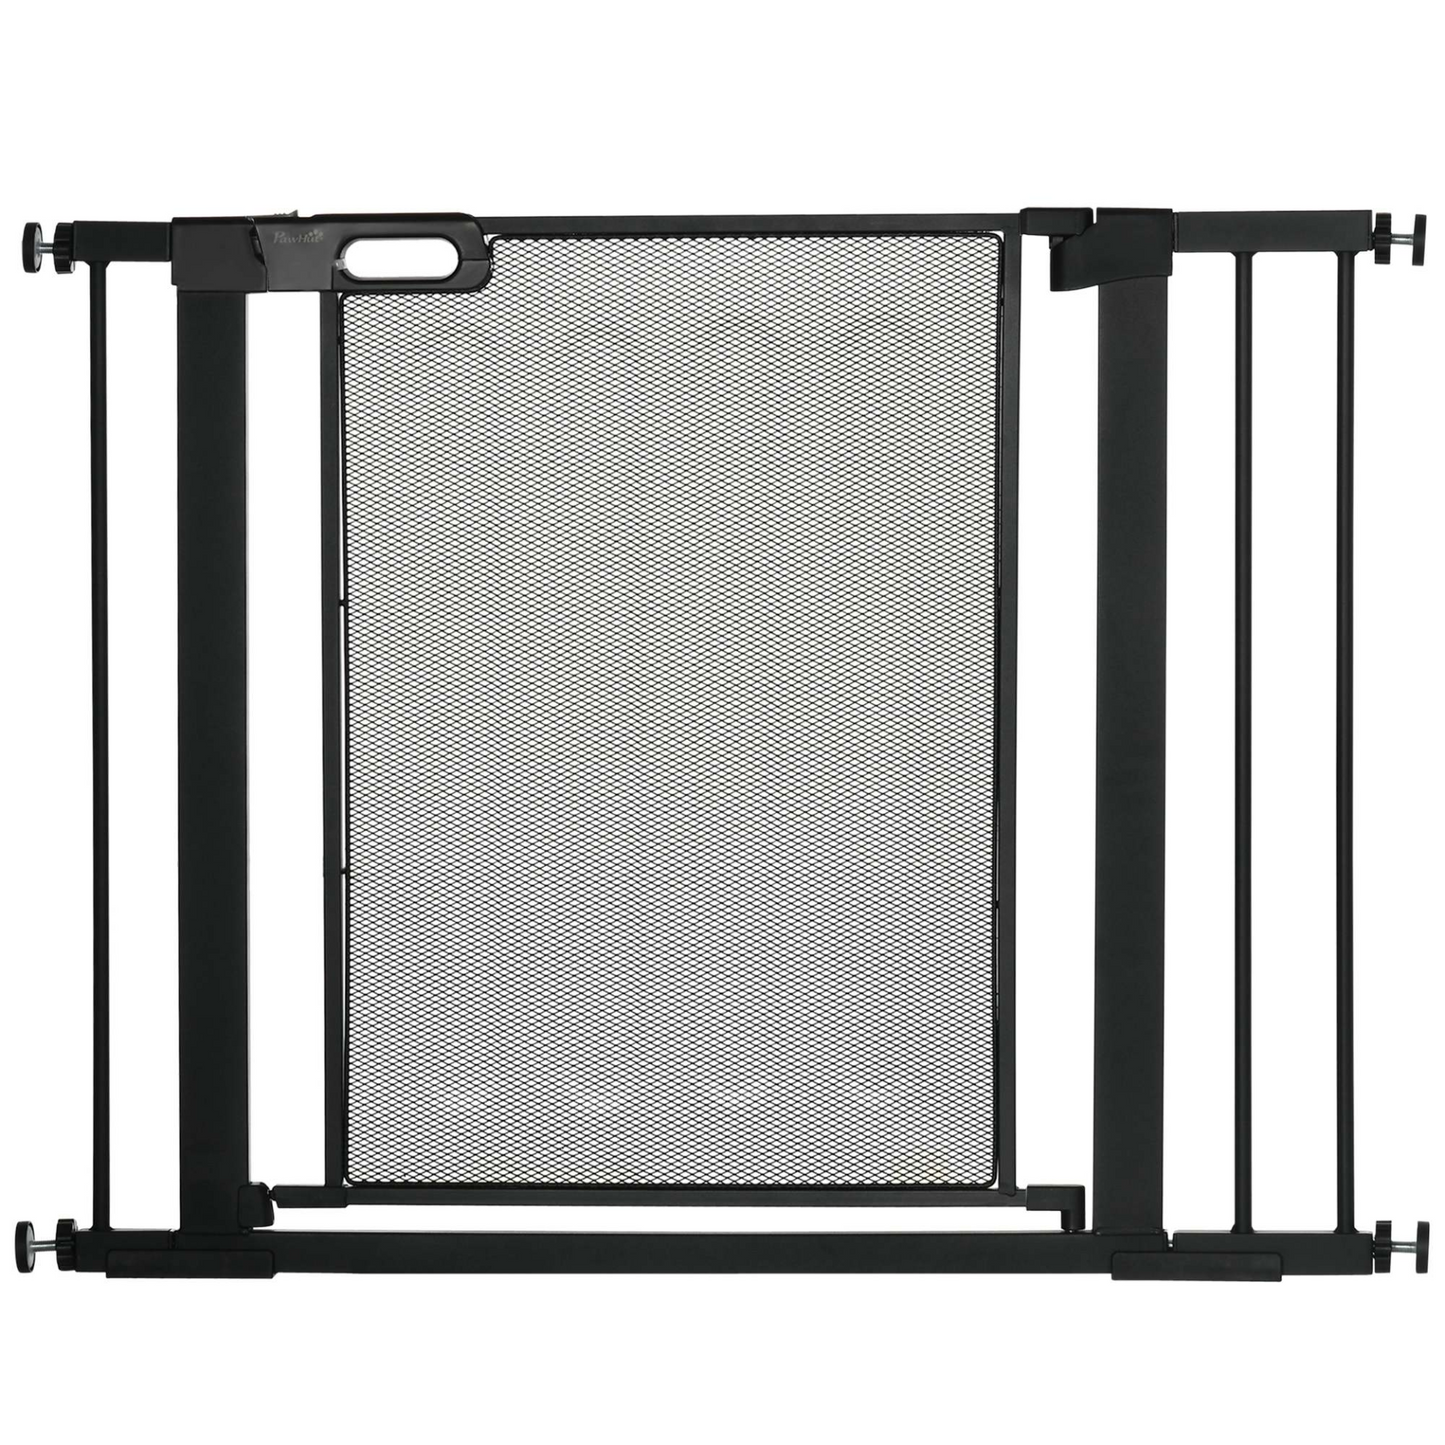 PawHut Pressure Fit Safety Gate for Doorways and Staircases, Dog Gate w/ Auto Closing Door, Pet Barrier for Hallways w/ Double Locking, Openings 75-103CM - Black